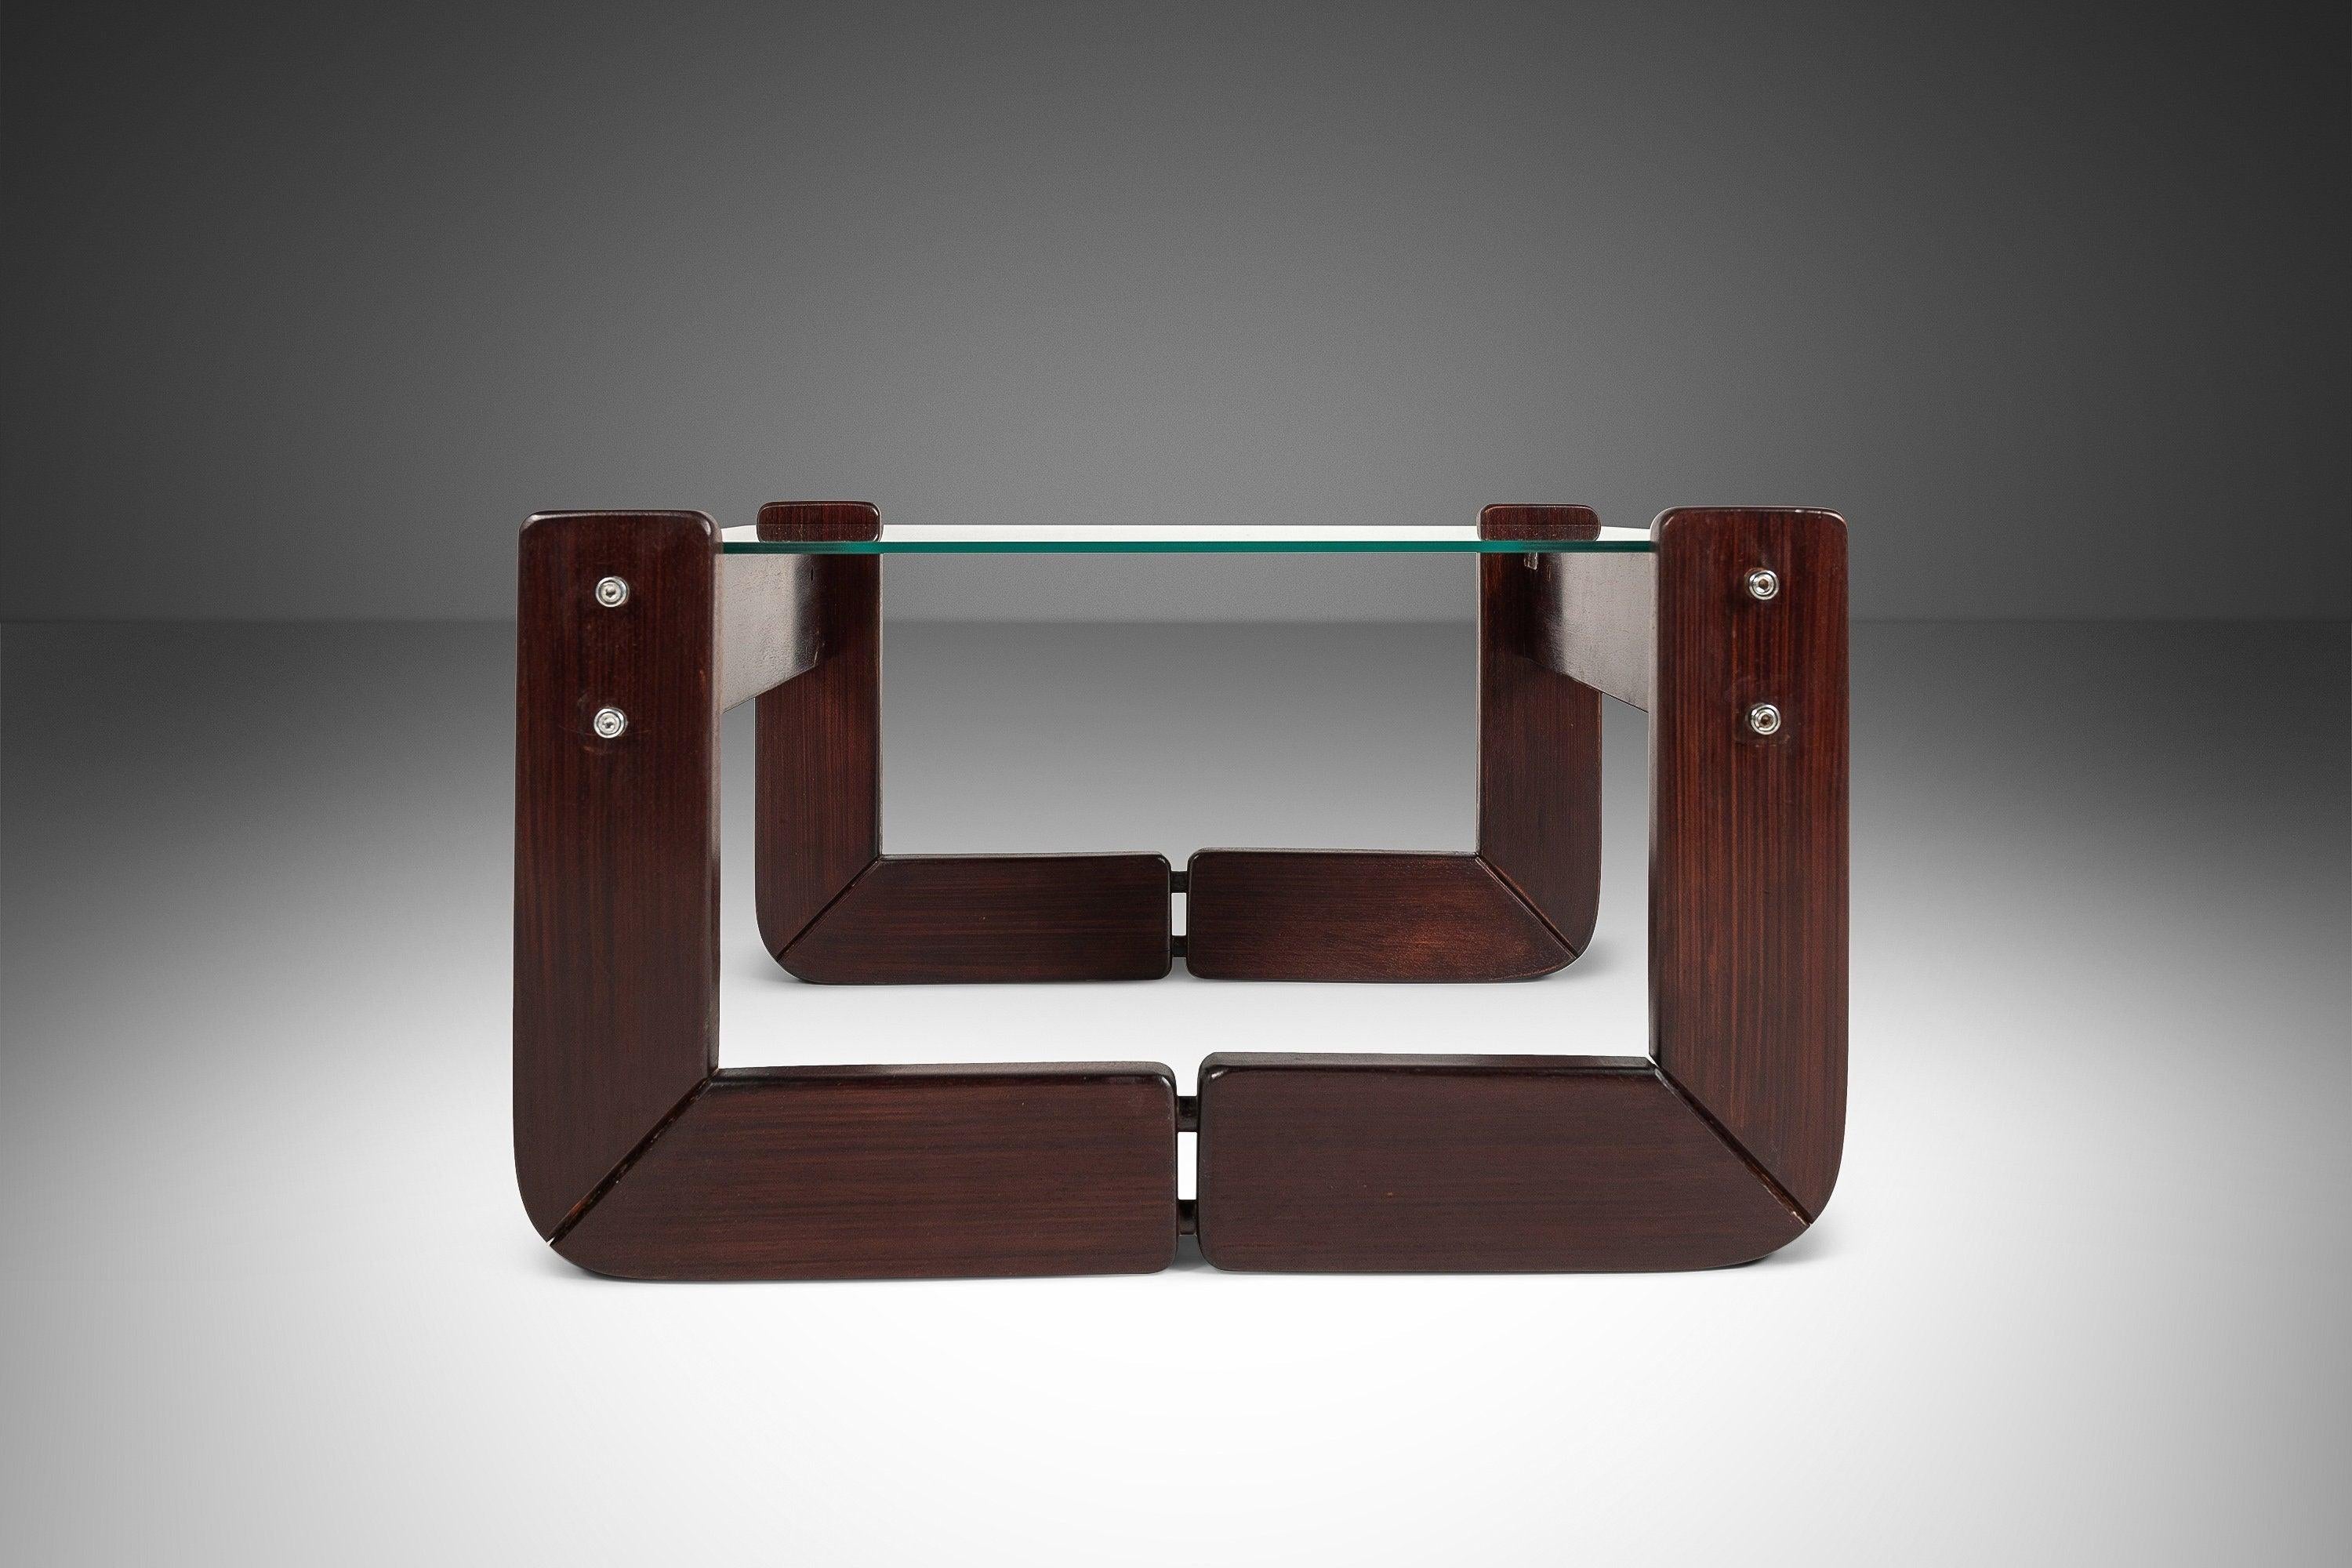 Attention collectors! This alluring end table, designed by the incomparable Percival Lafer, is the epitome of Brazilian minimalism for which Lafer and his furniture company are regarded as the paramount makers. The solid jacaranda frame is in superb